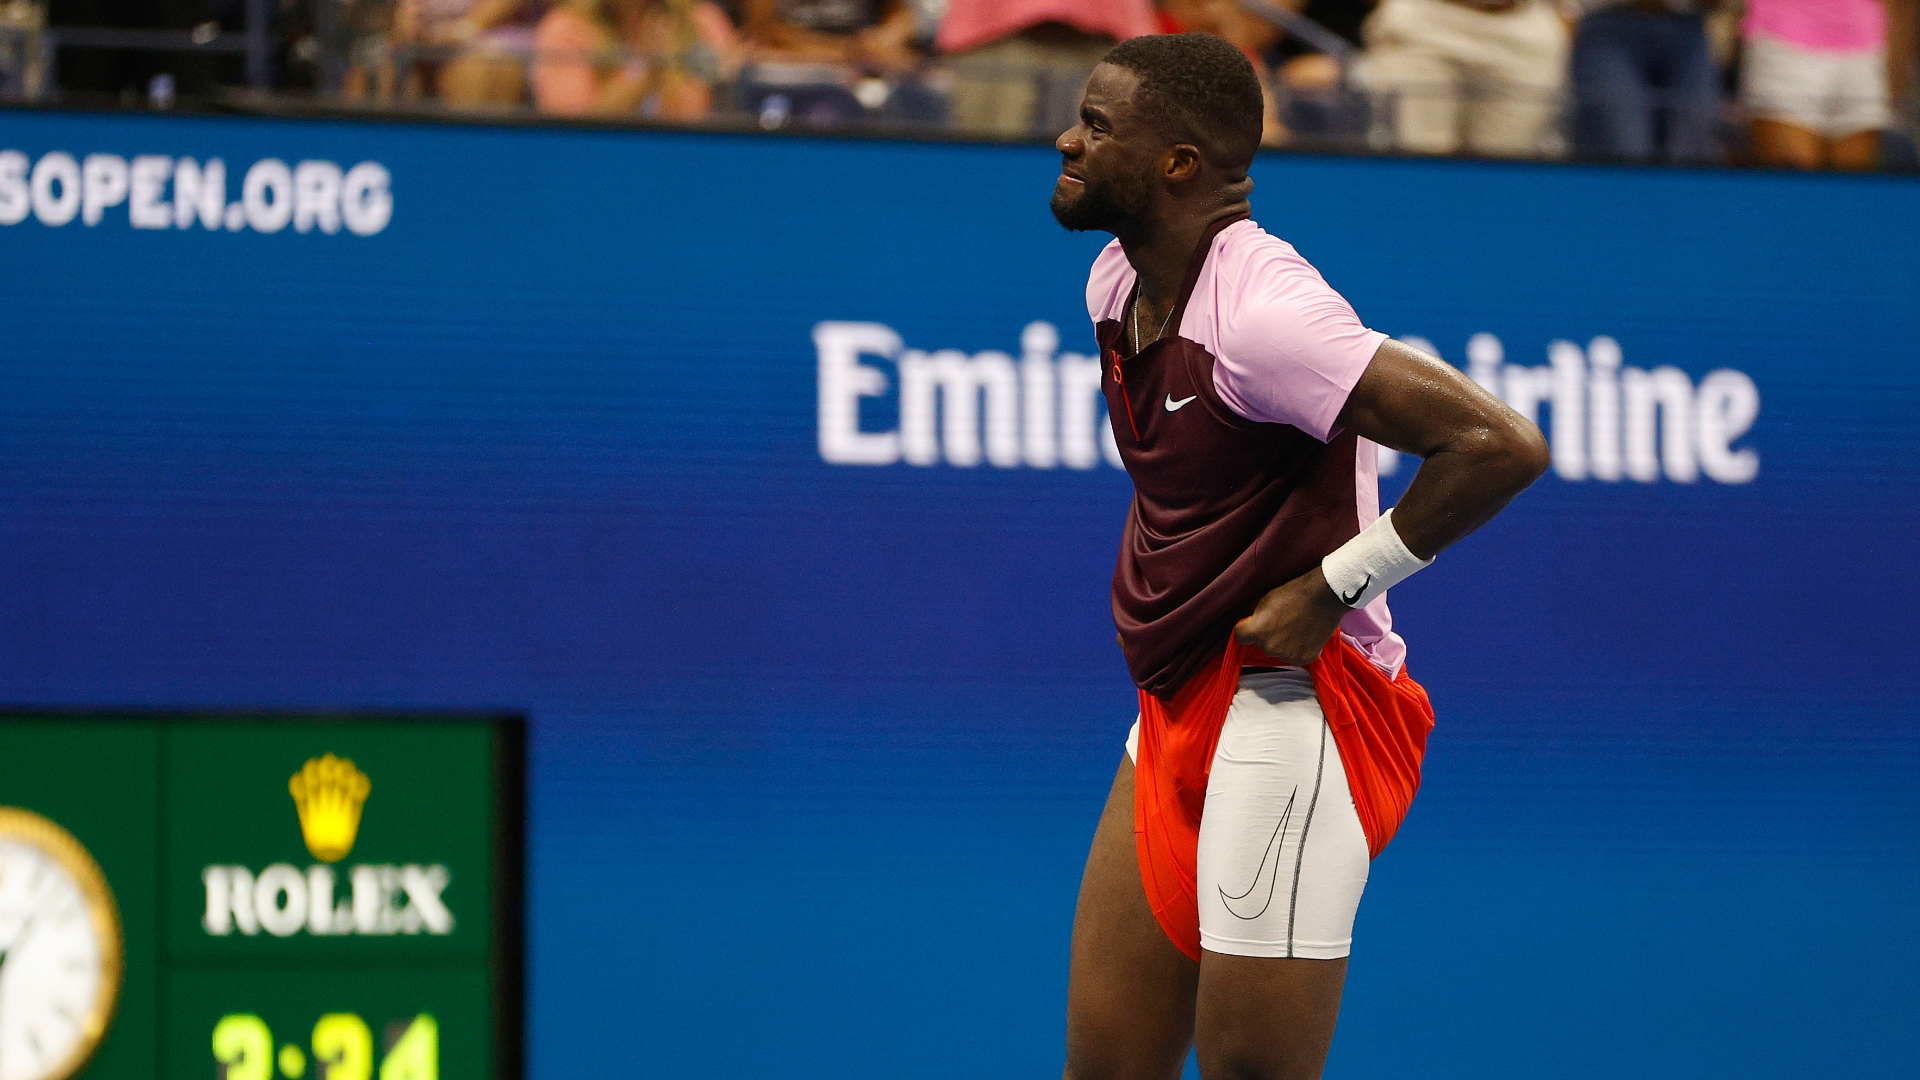 Tiafoe emotional after finishing upset of Nadal - Stream the Video